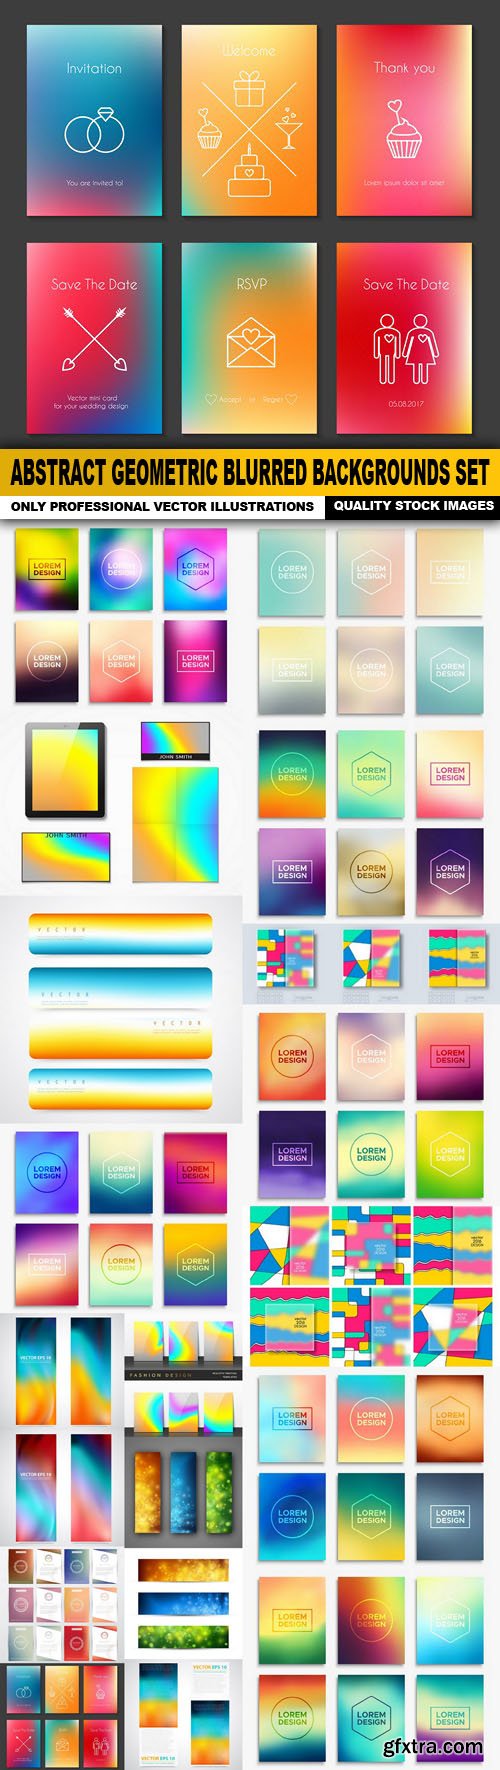 Abstract Geometric Blurred Backgrounds Set - 20 Vector